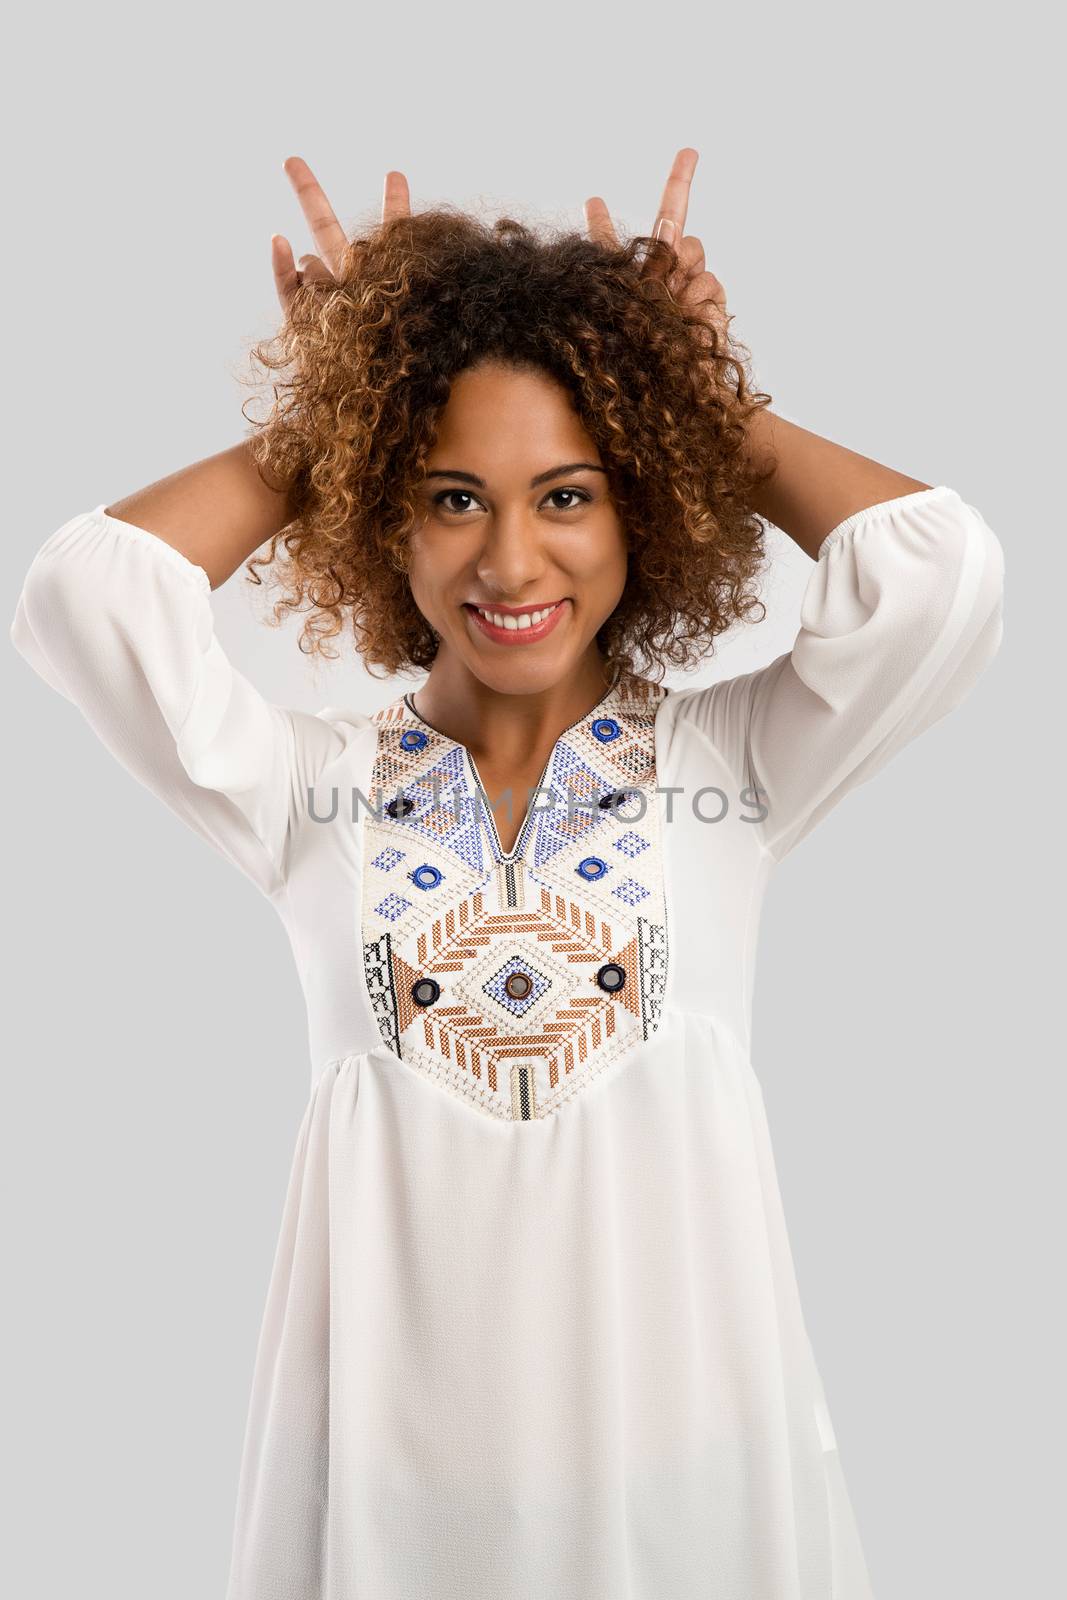 Beautiful African American woman making a silly face